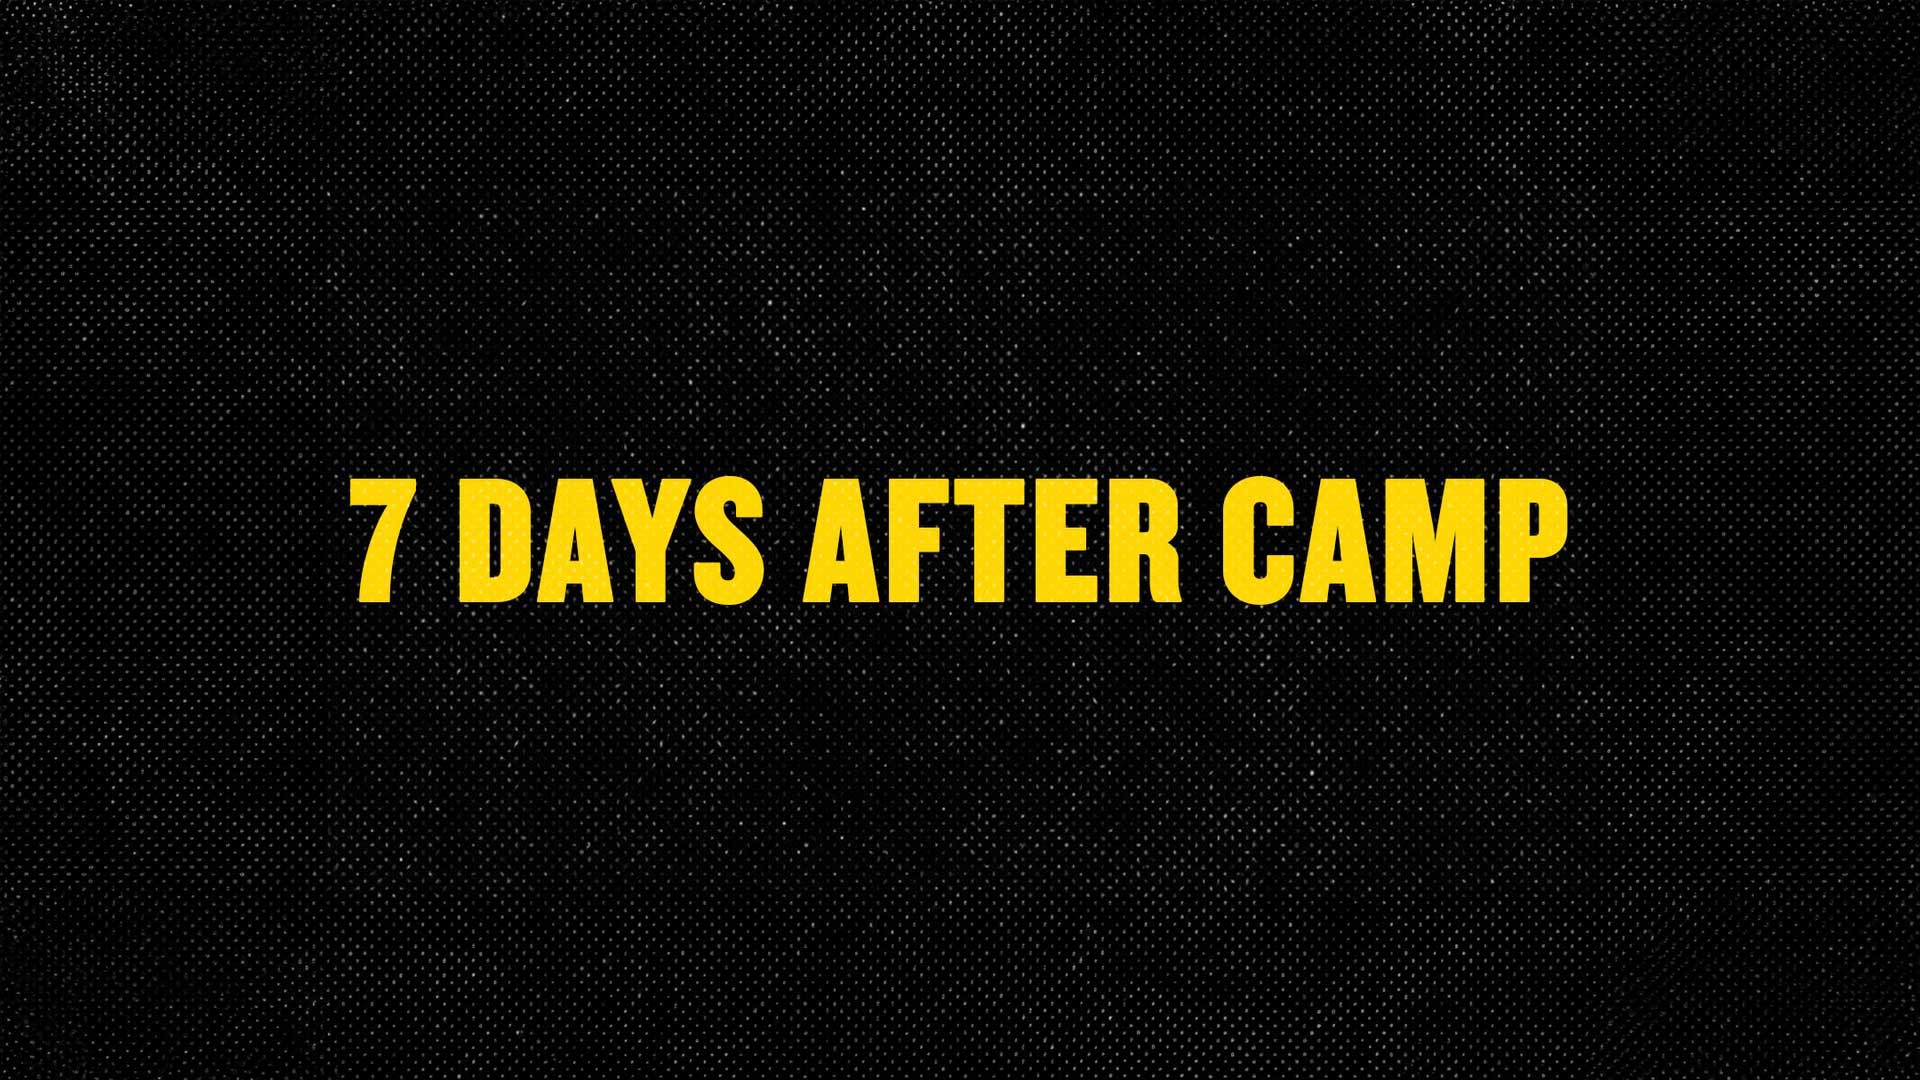 Featured Image for “7 Days After Camp"